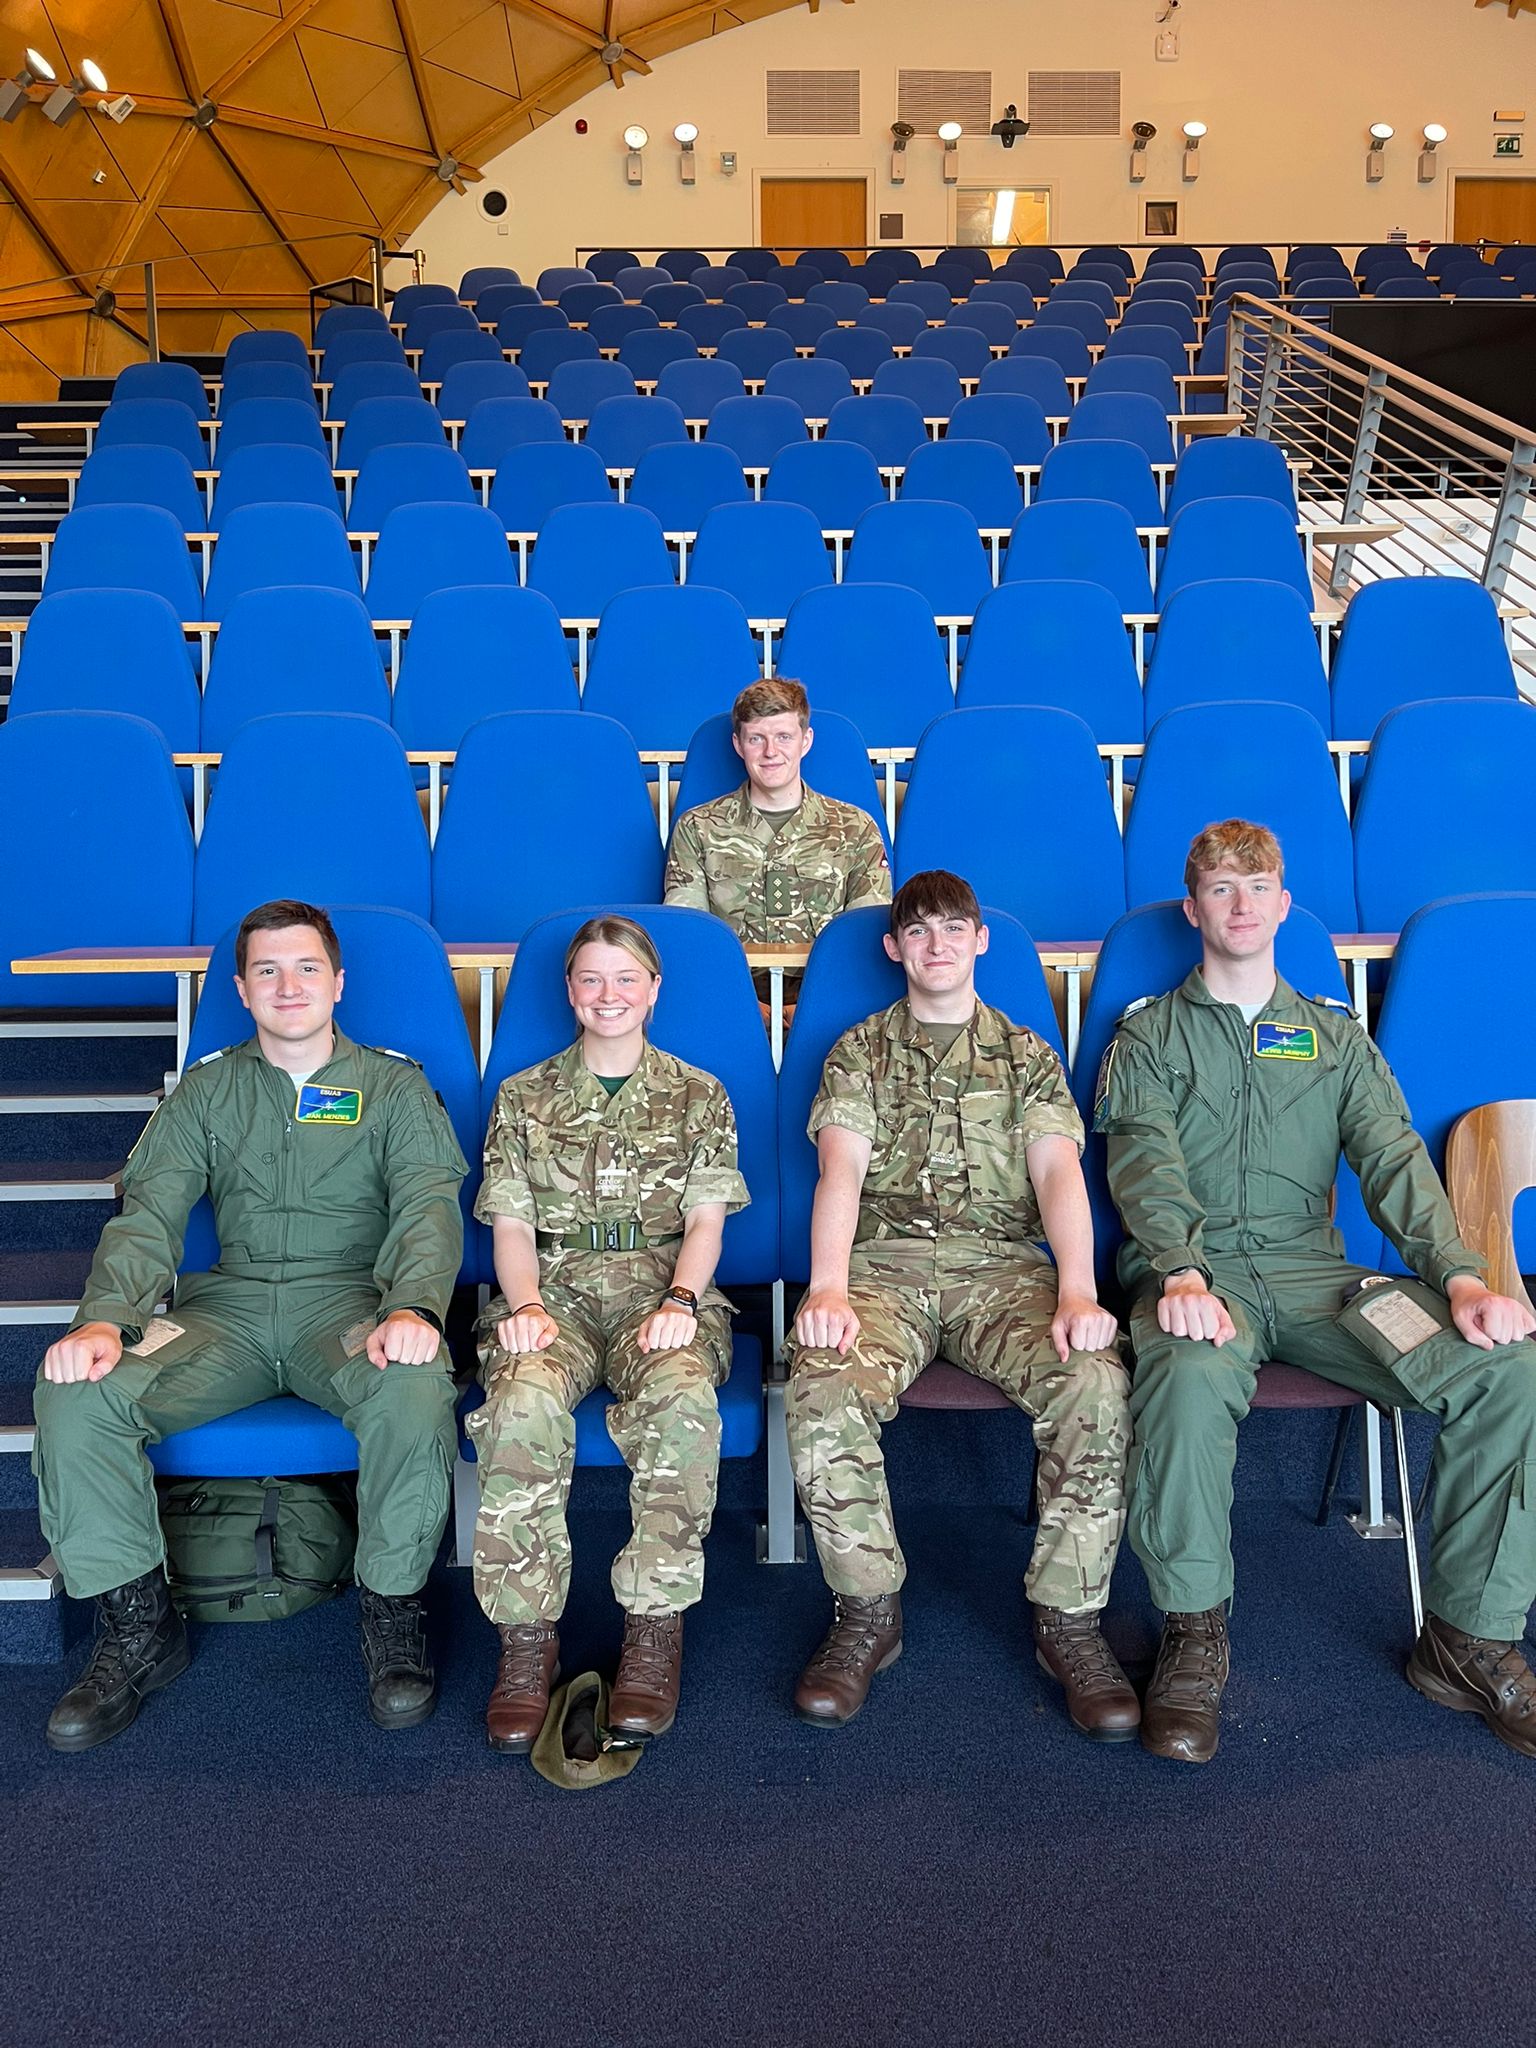 5 university students who combine their studies with time in the Reserves or Cadet Force